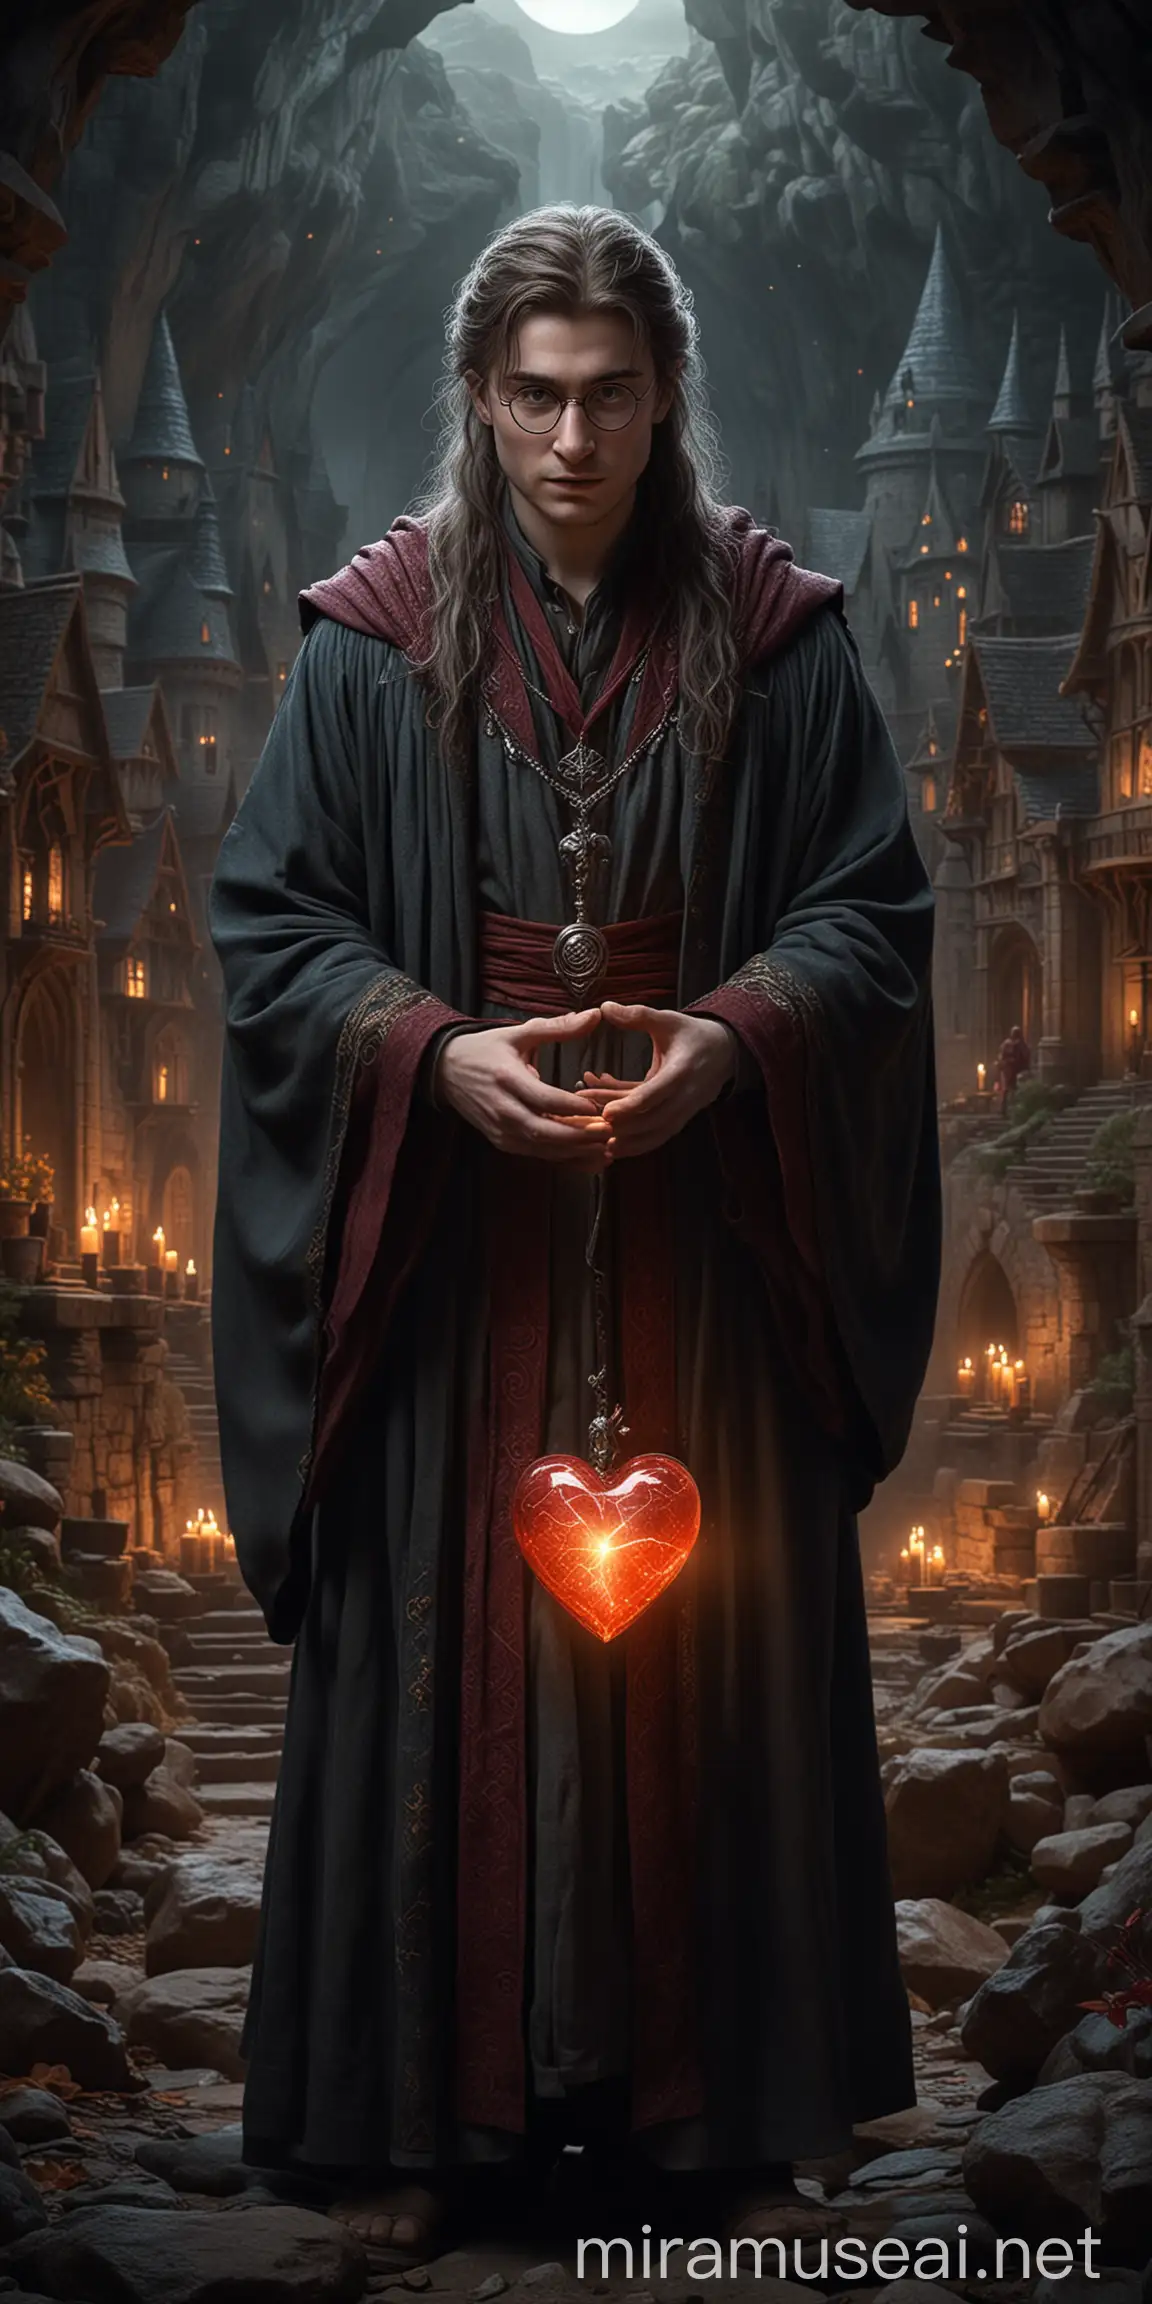 Wizard Harry Potter Holding Human Heart in Mythical Game of Thrones Kingdom